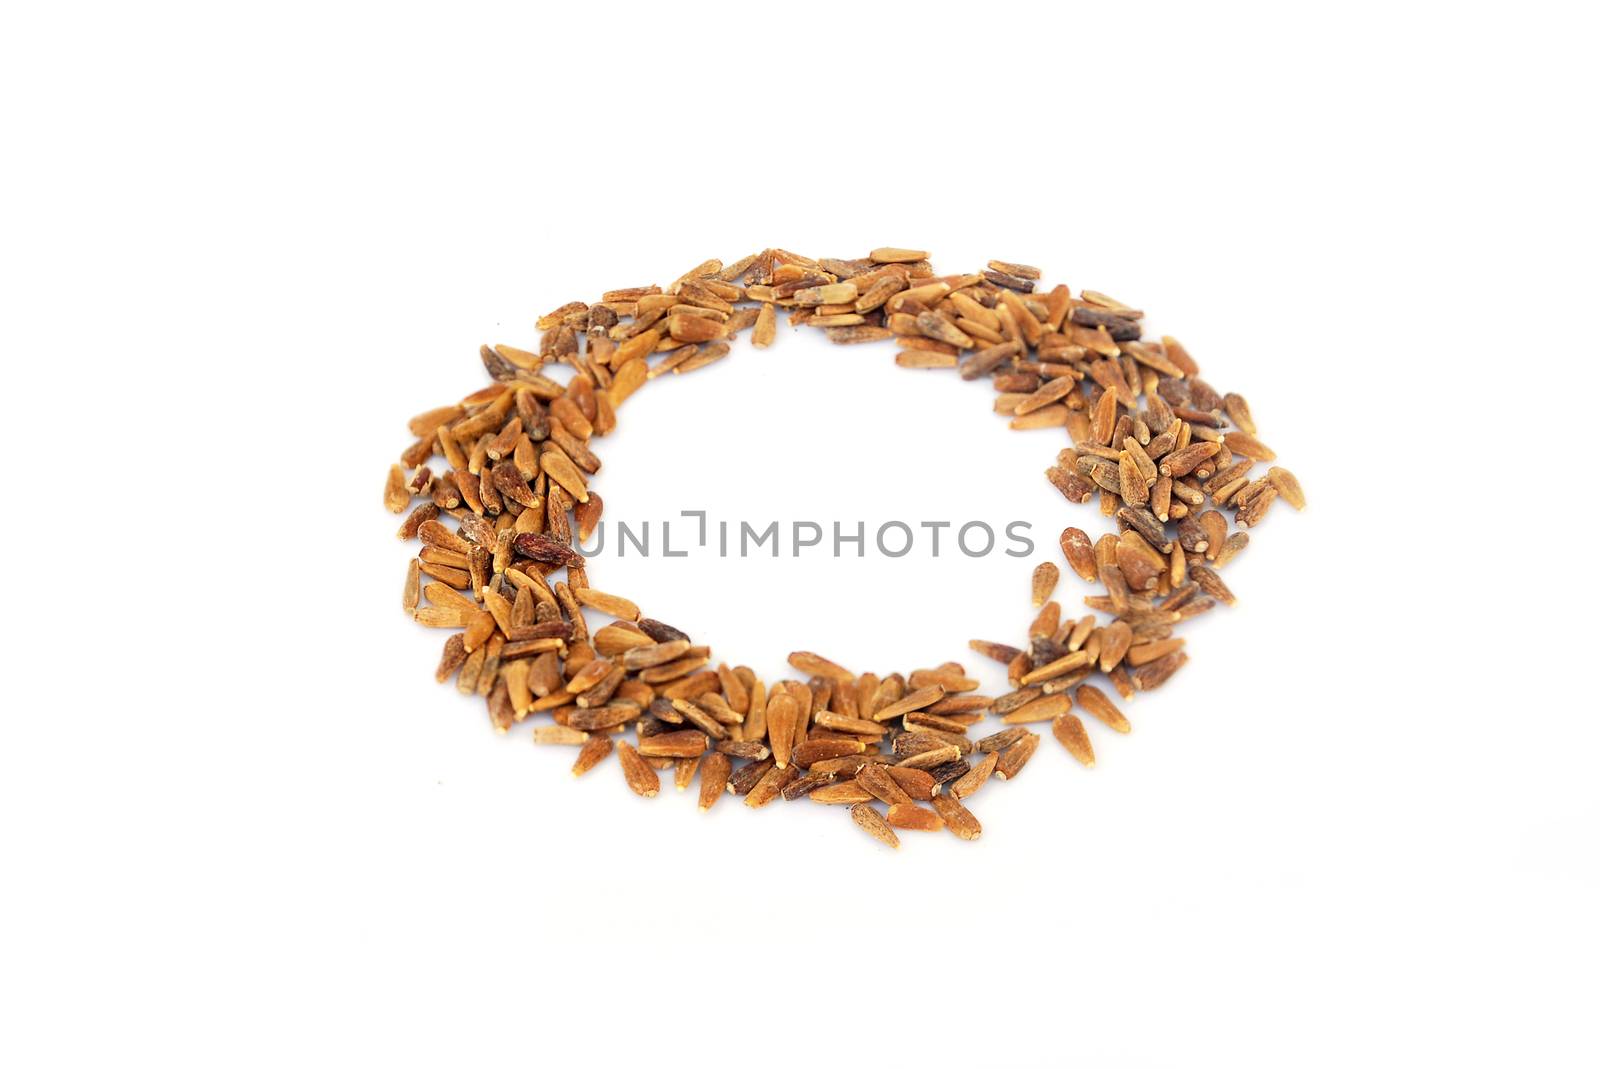 Aster seeds  on white background.